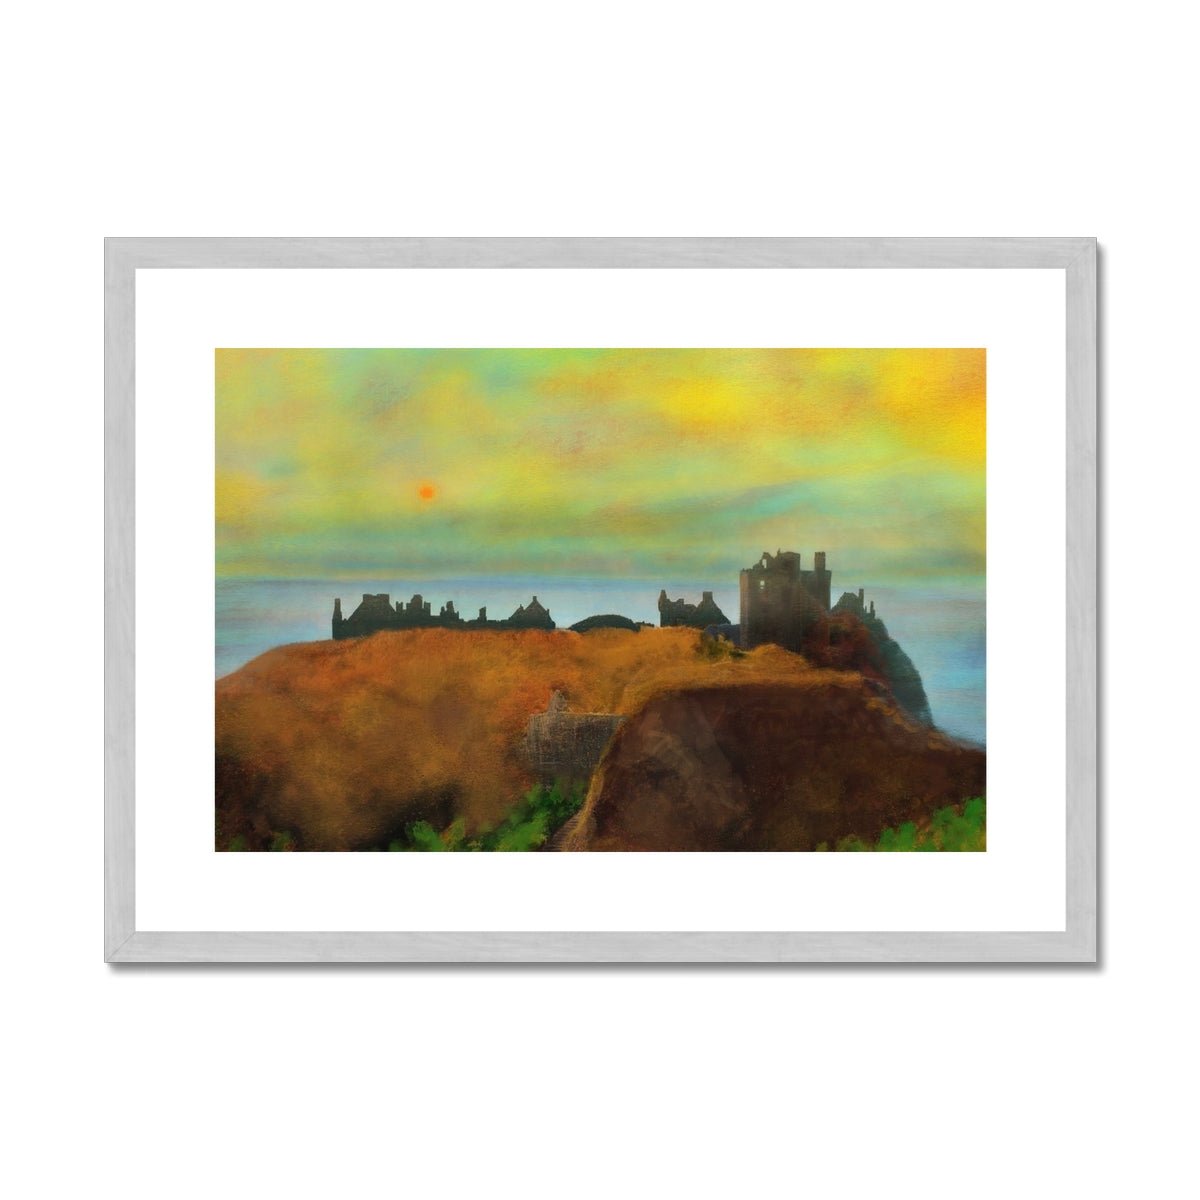 Dunnottar Castle Dusk Painting | Antique Framed & Mounted Prints From Scotland-Antique Framed & Mounted Prints-Scottish Castles Art Gallery-A2 Landscape-Silver Frame-Paintings, Prints, Homeware, Art Gifts From Scotland By Scottish Artist Kevin Hunter